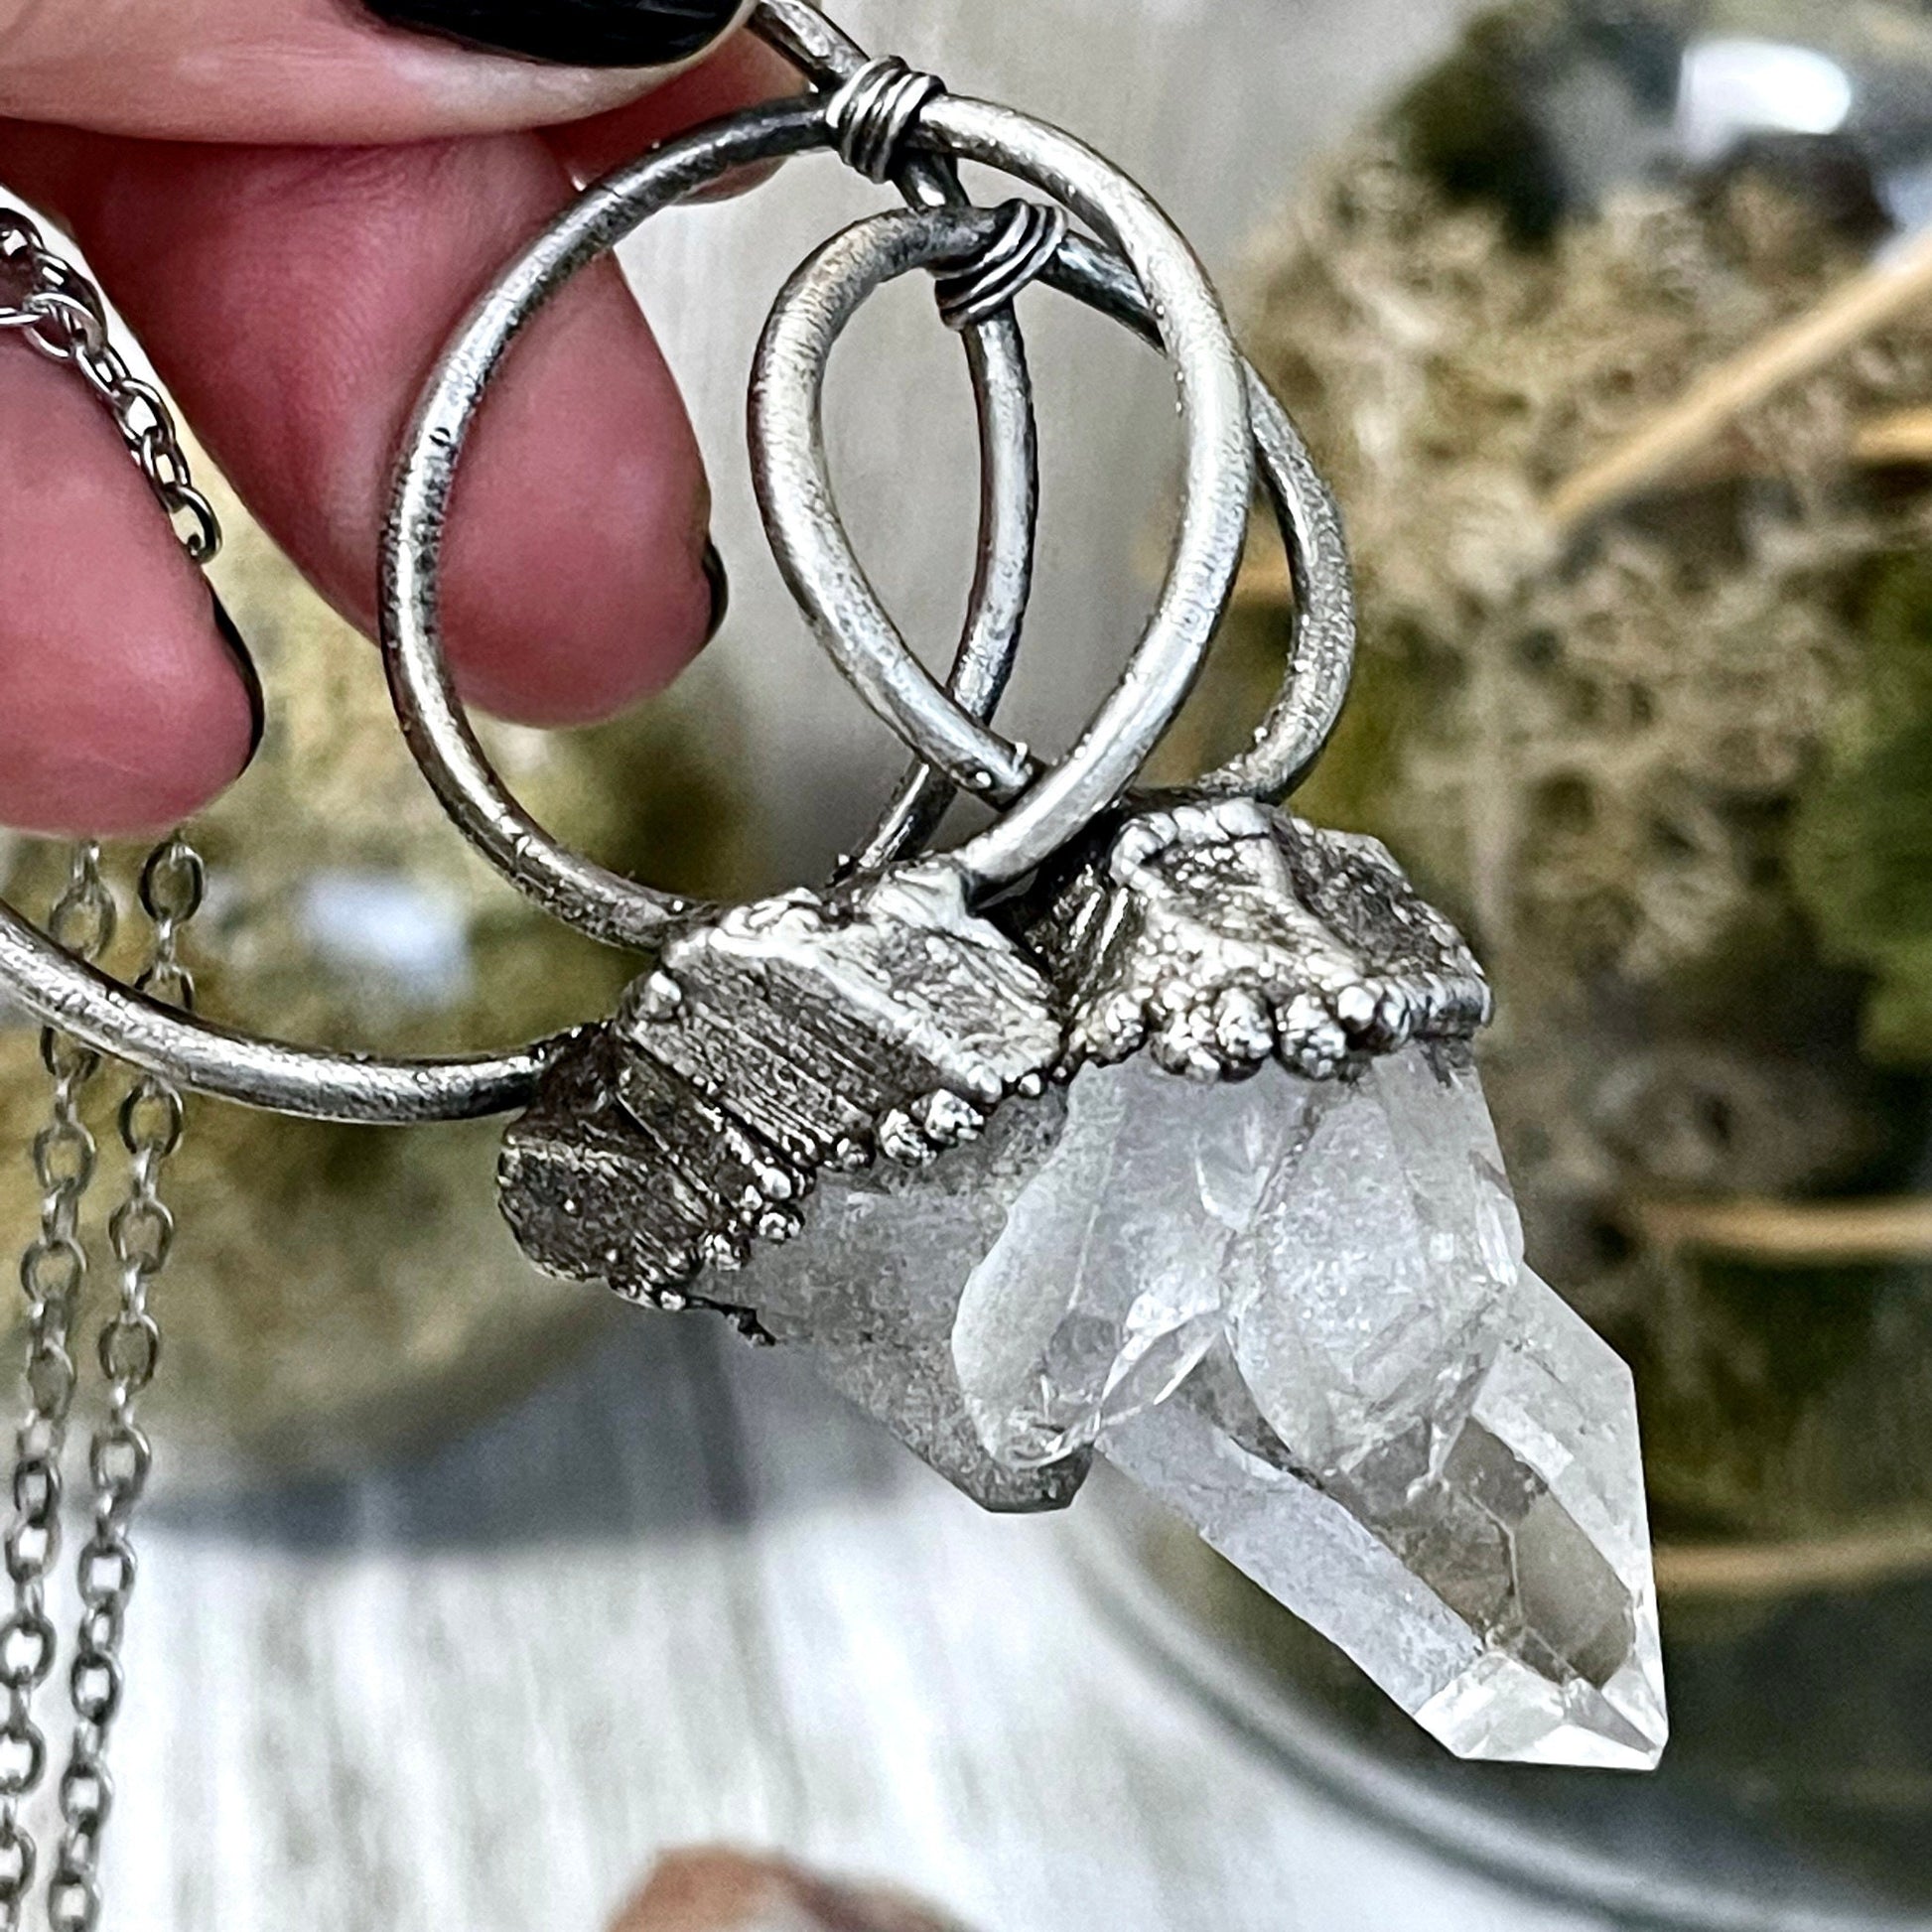 Bohemian Jewelry, Boho Crystal Jewelry, Crystal Necklaces, Etsy ID: 1283906550, FOXLARK- NECKLACES, Gift For Her, Healing Crystal, Jewelry, Necklaces, Quartz Jewelry, Quartz Necklace, Raw Clear Quartz, Raw Crystal Jewelry, Raw crystal necklace, Raw Stone